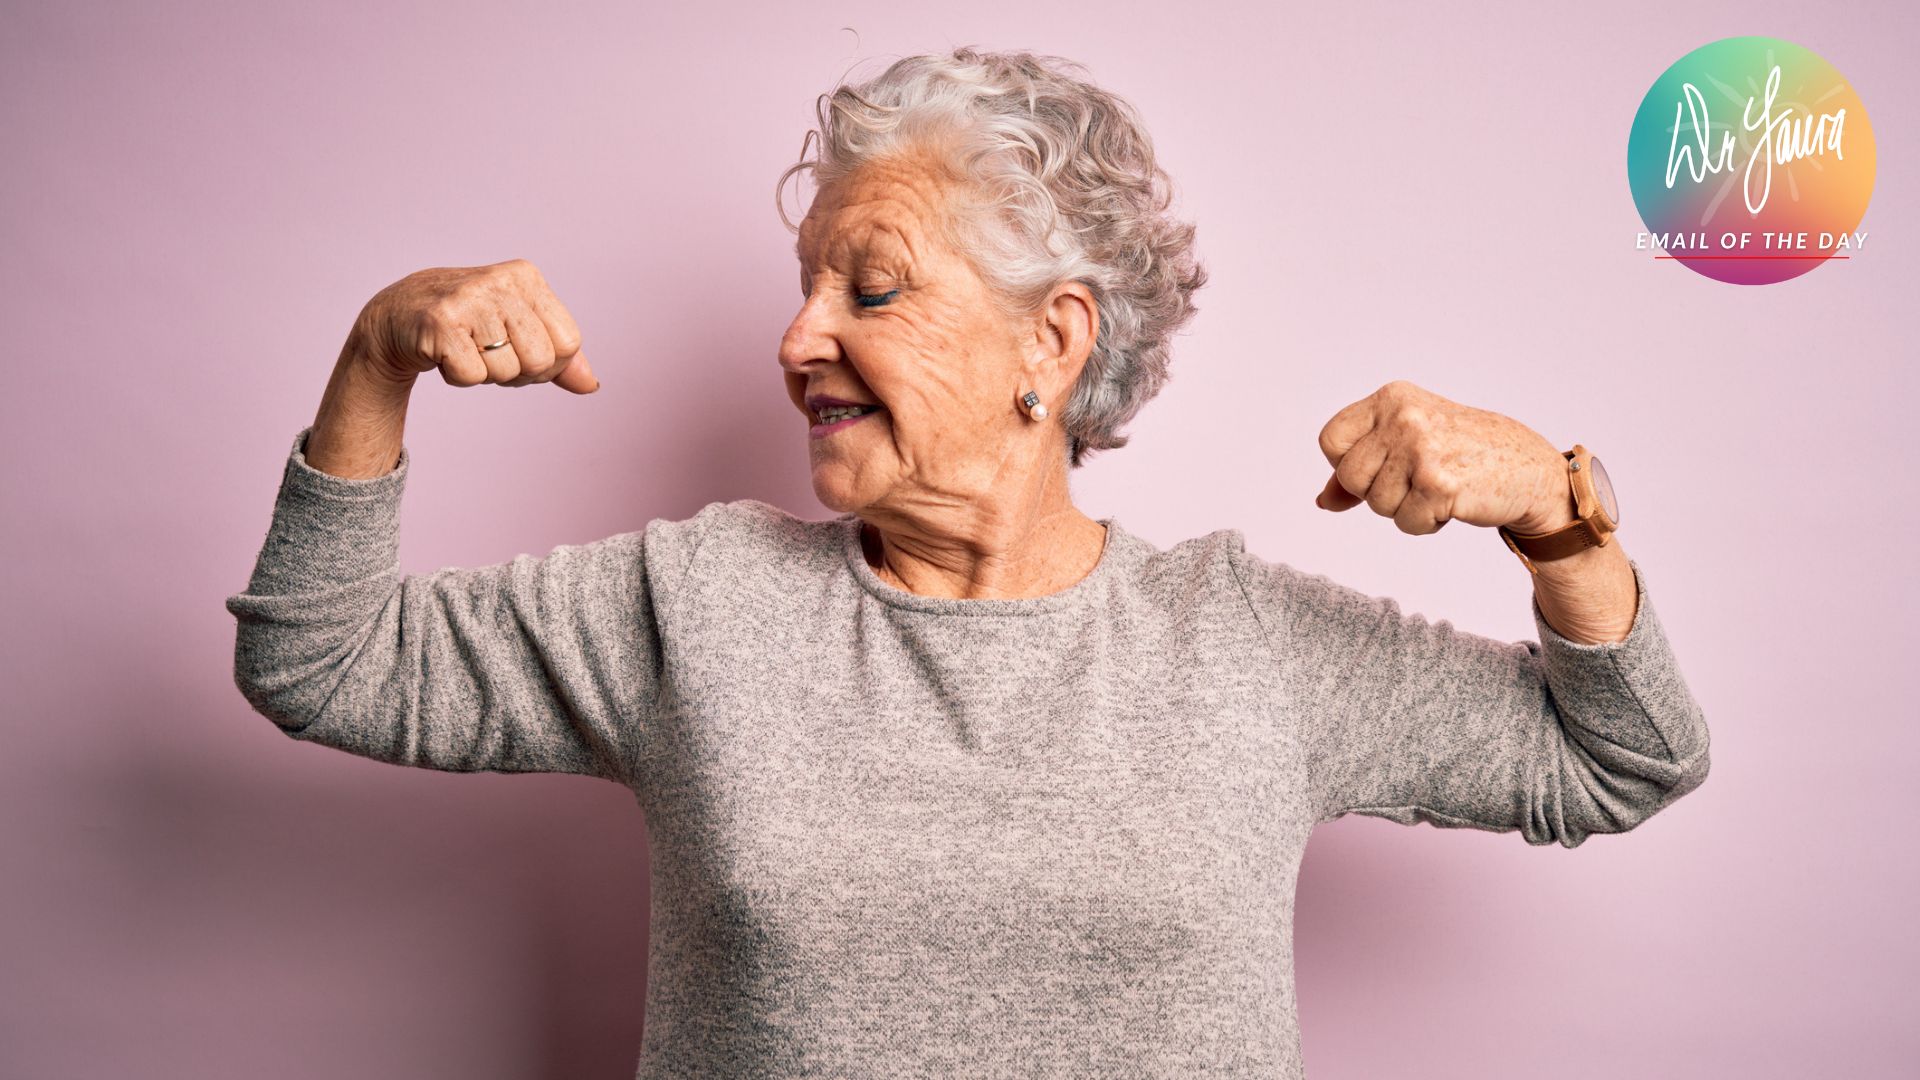 Older woman in grey shirt flexes her biceps while looking down at right arm